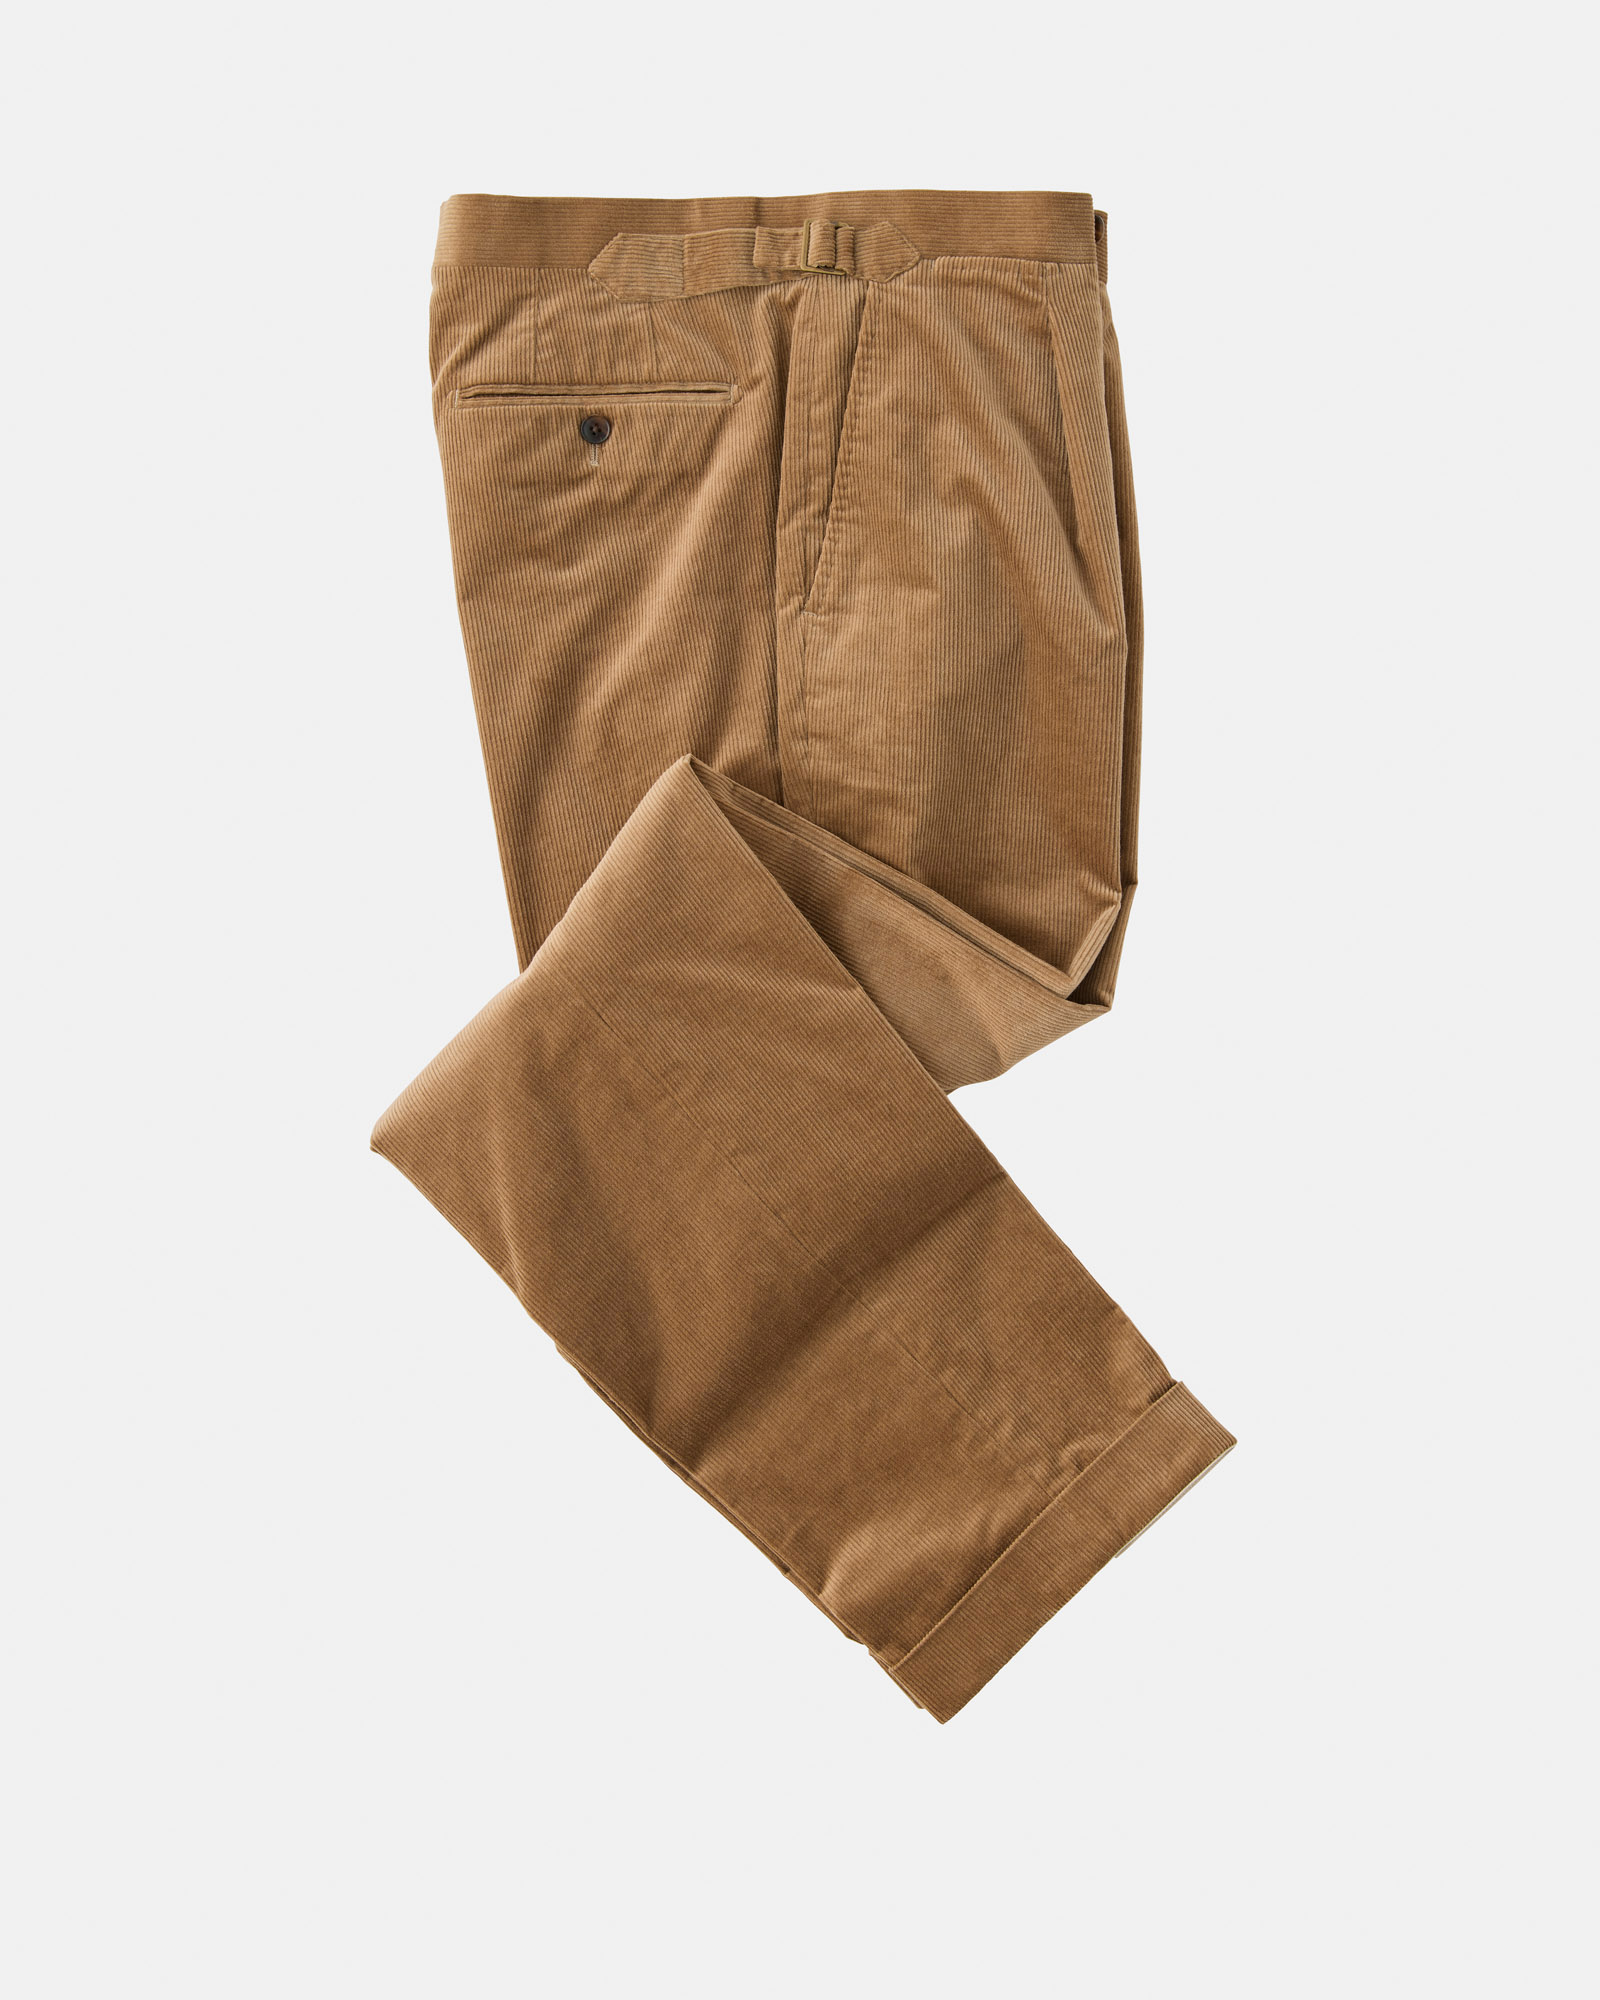 Can corduroy pants be tailored? - Quora